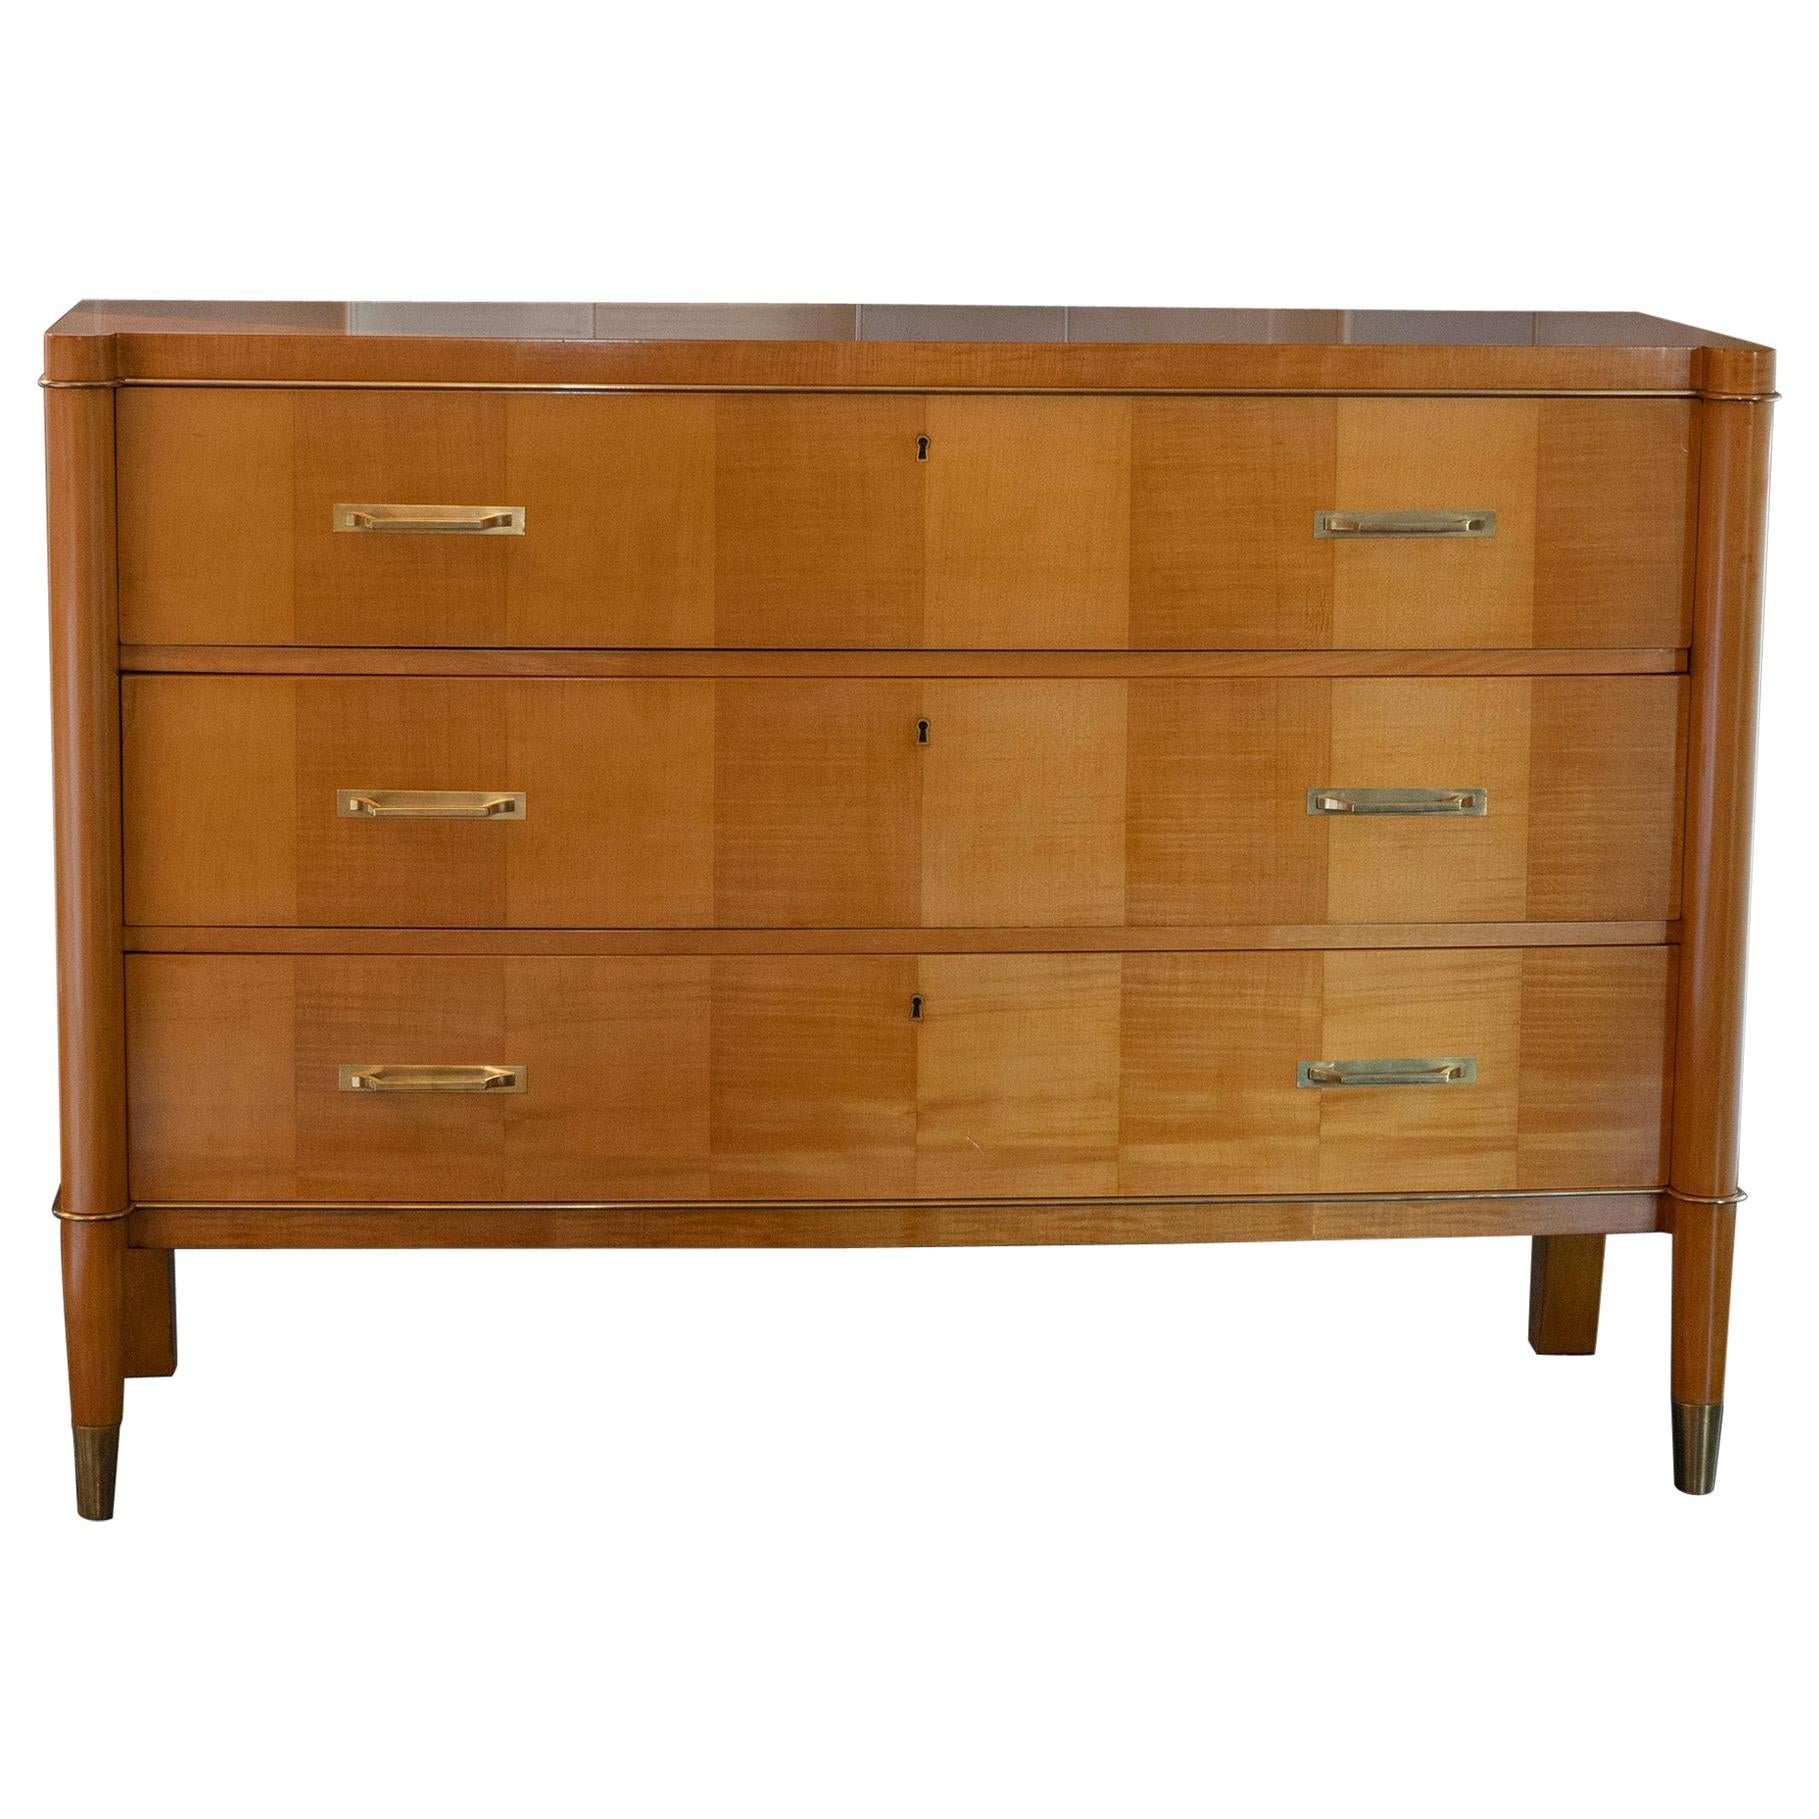 Lacquered Cherry Wood and Brass Chest of Drawers, De Coene Belgium, circa 1940